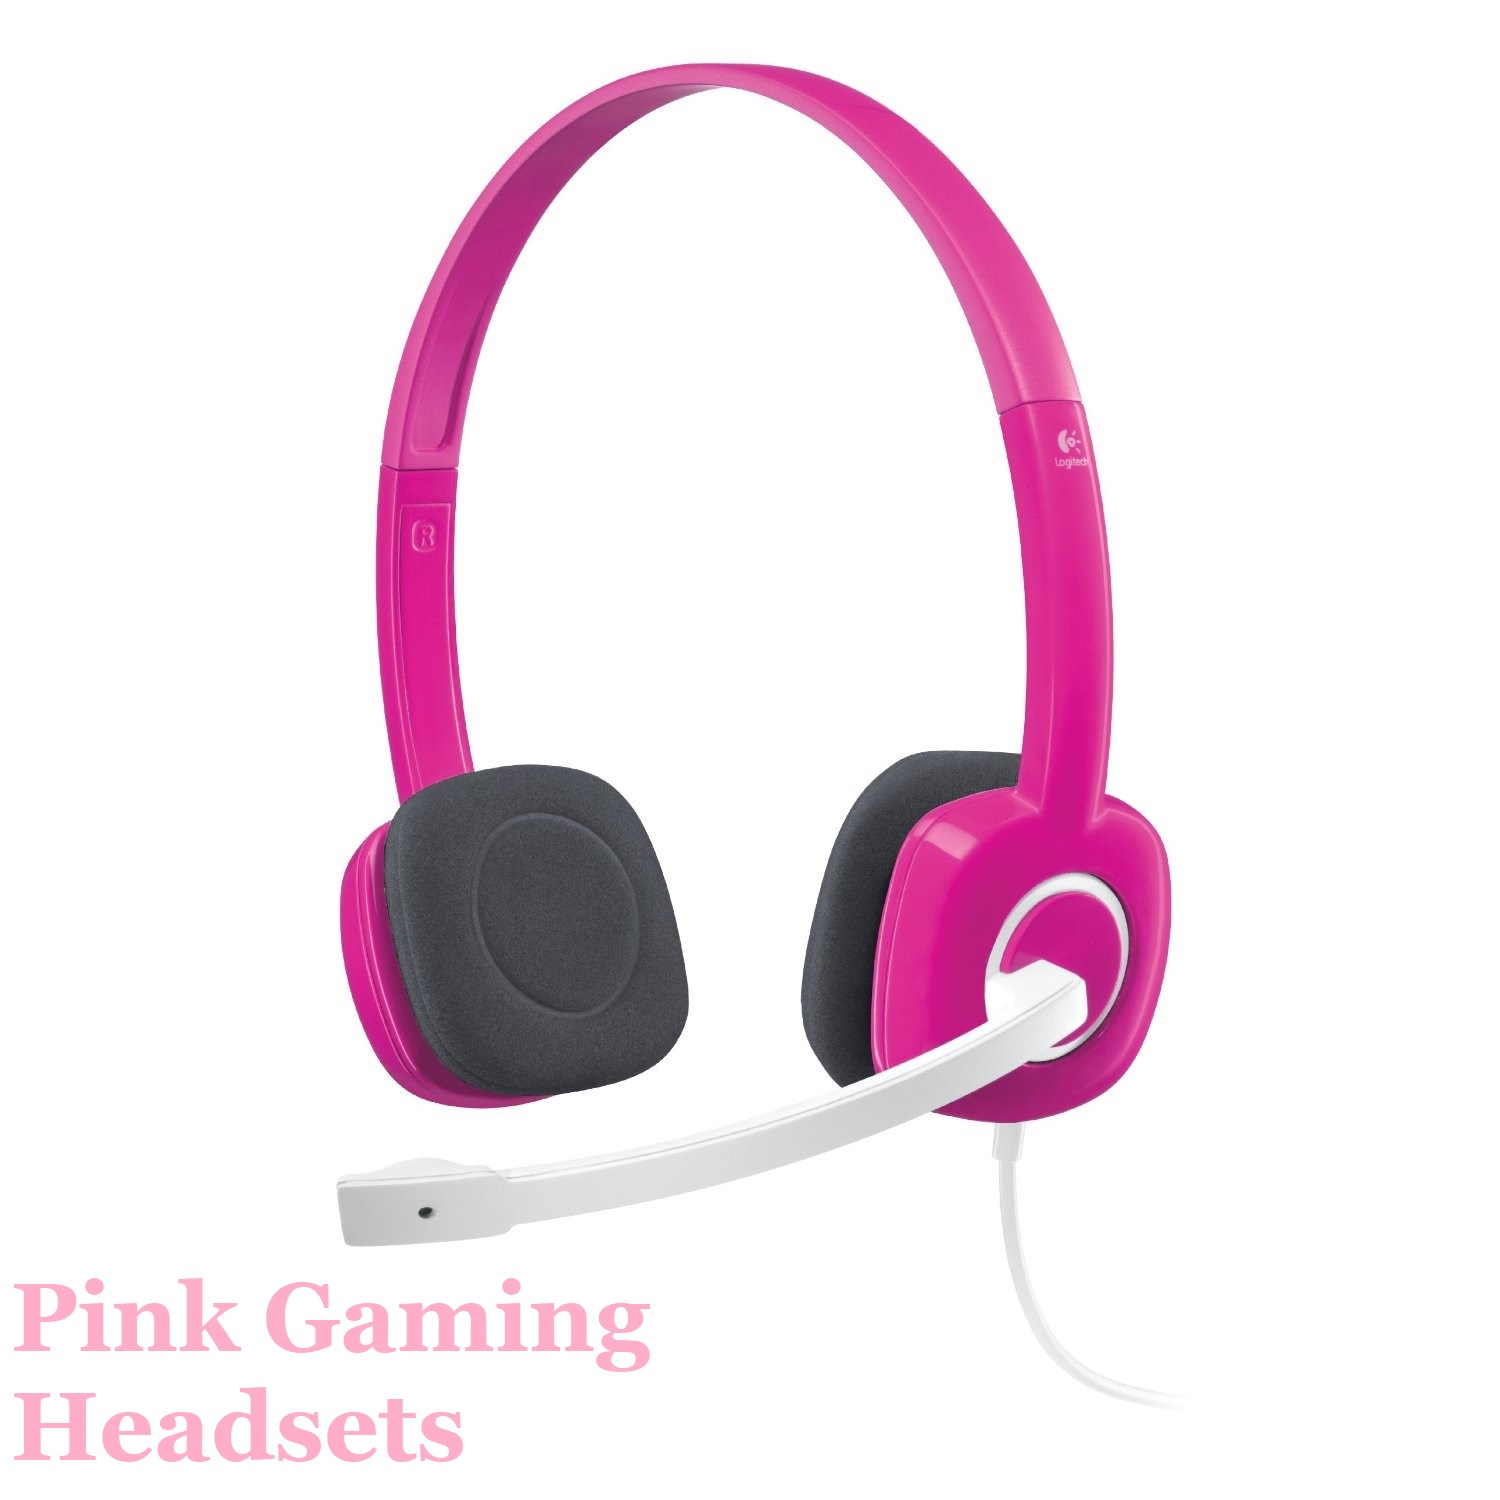 How To Use Pink Gaming Headsets With IPads and PC?